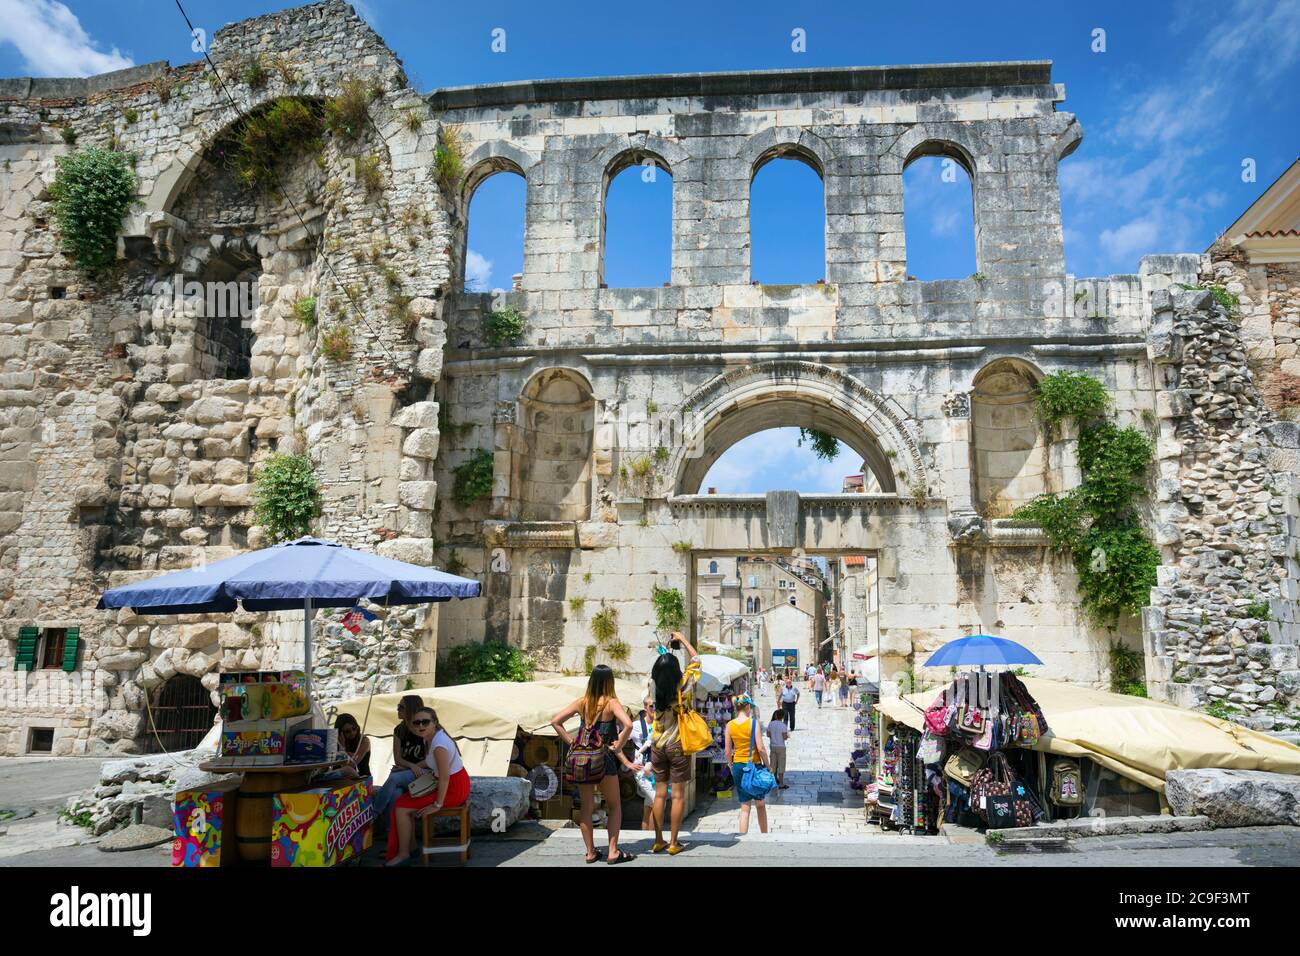 Split, Dalmatian Coast, Croatia.  The Eastern Gate to the Palace of Diocletian, also known as the Silver Gate.  The Historic Centre of Split is a UNES Stock Photo